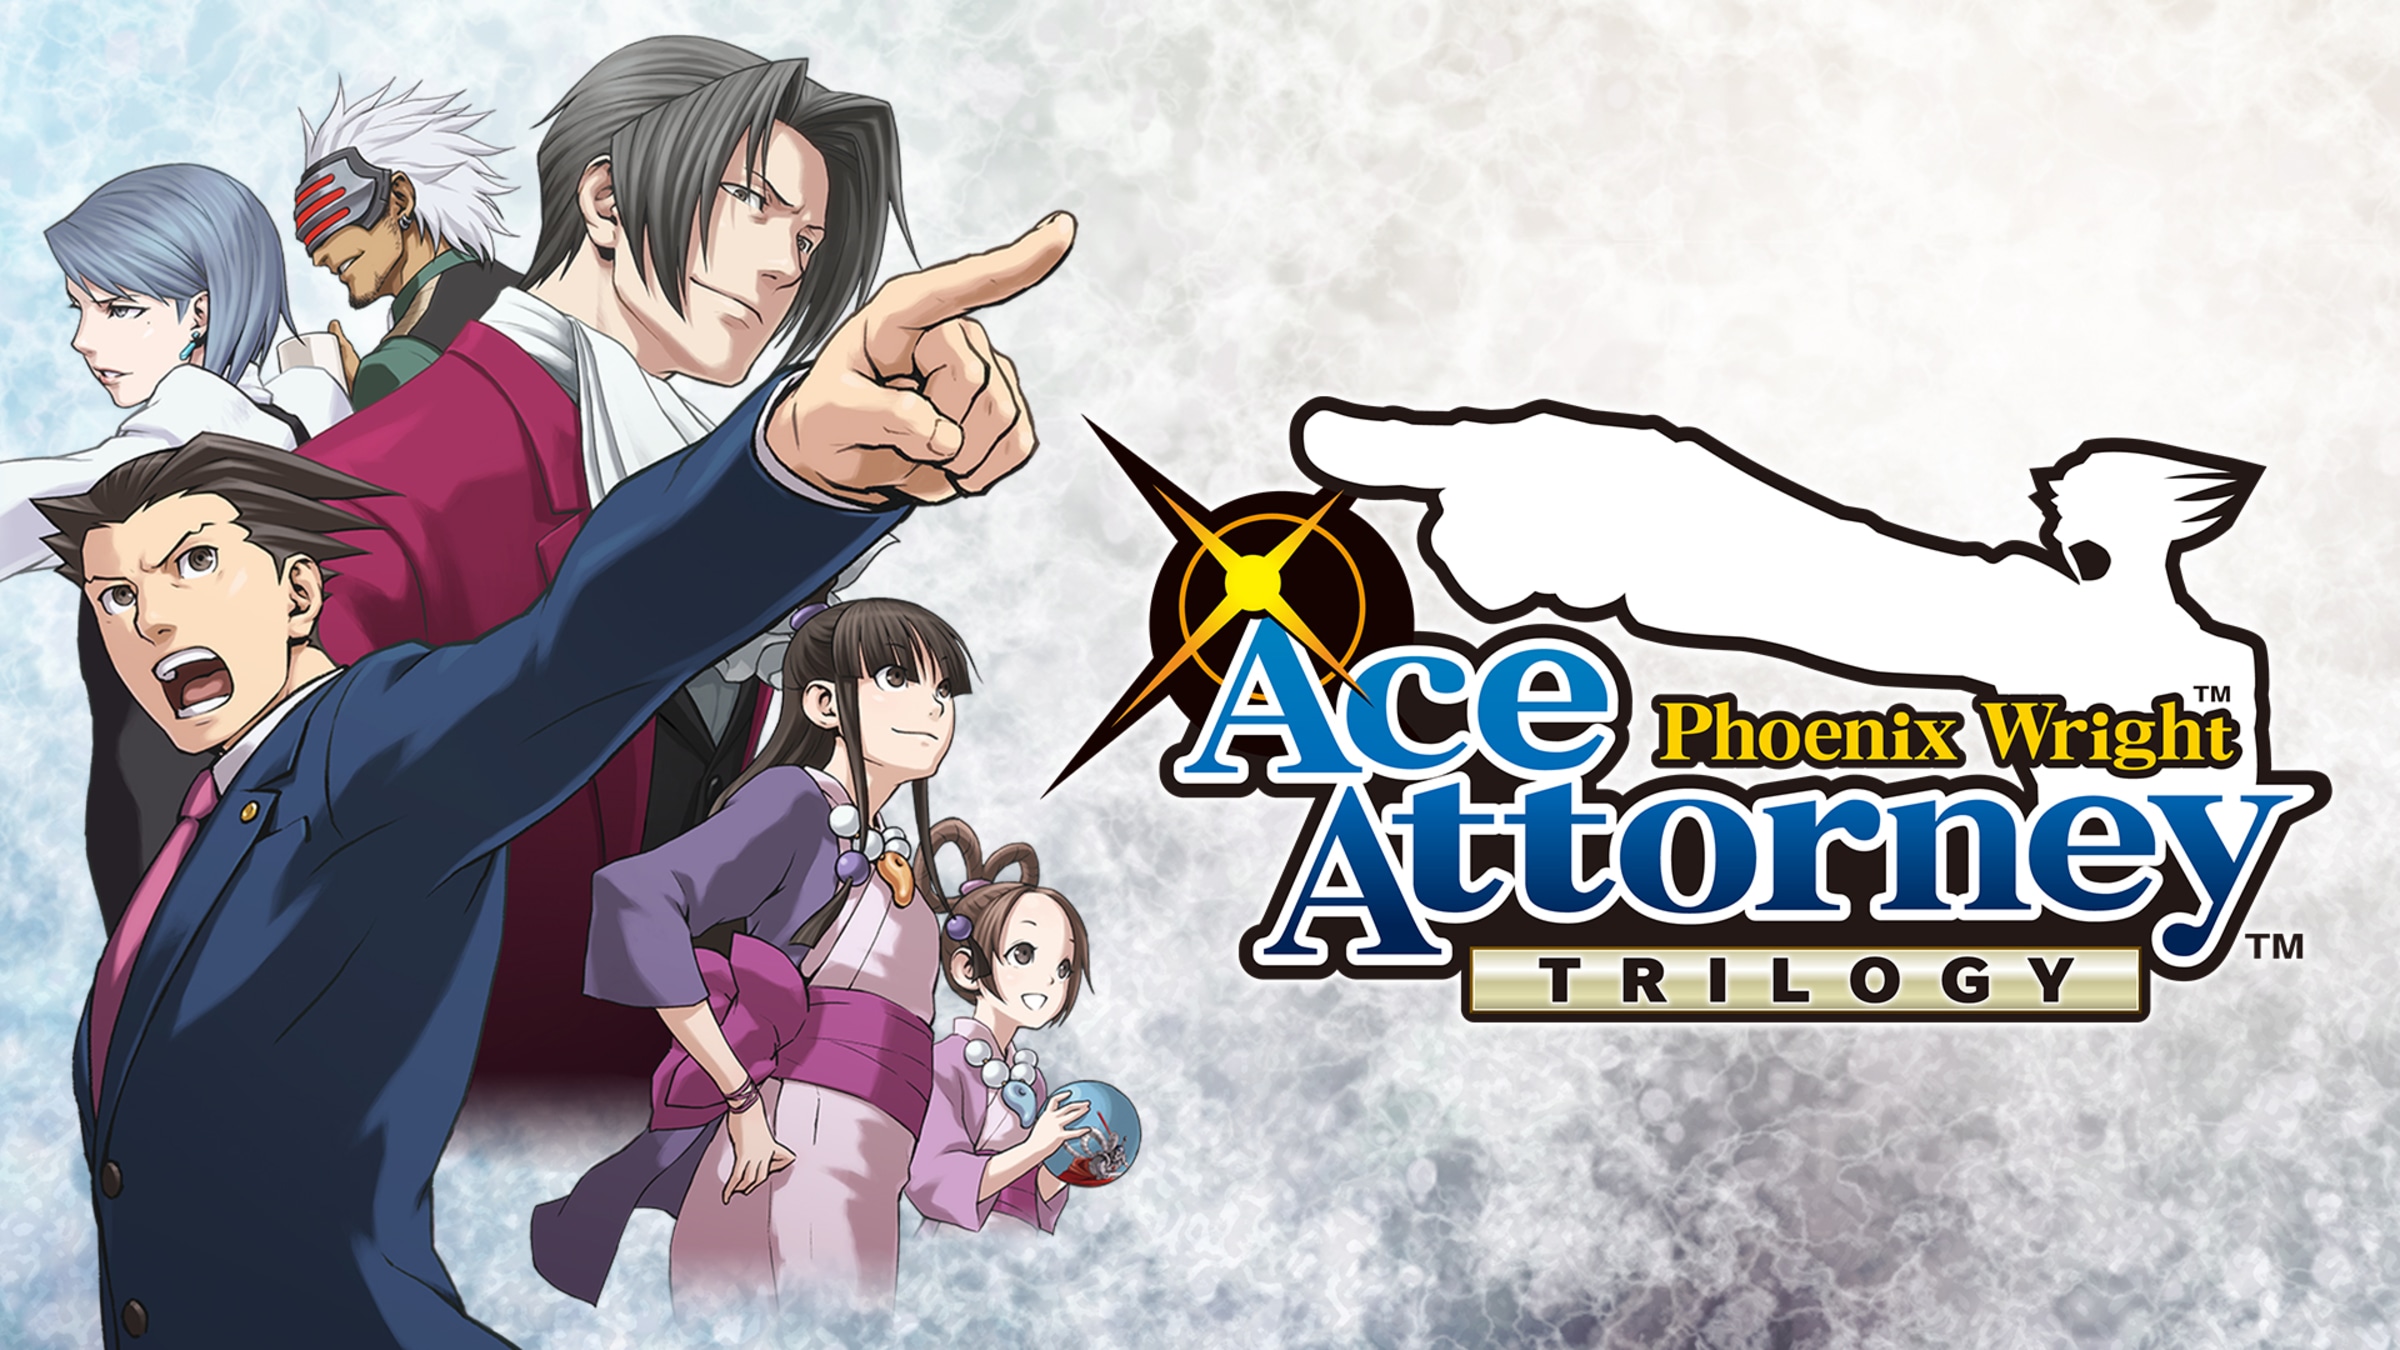 Phoenix Wright: Ace Attorney Trilogy (Nintendo Switch Digital Download) $10 & More